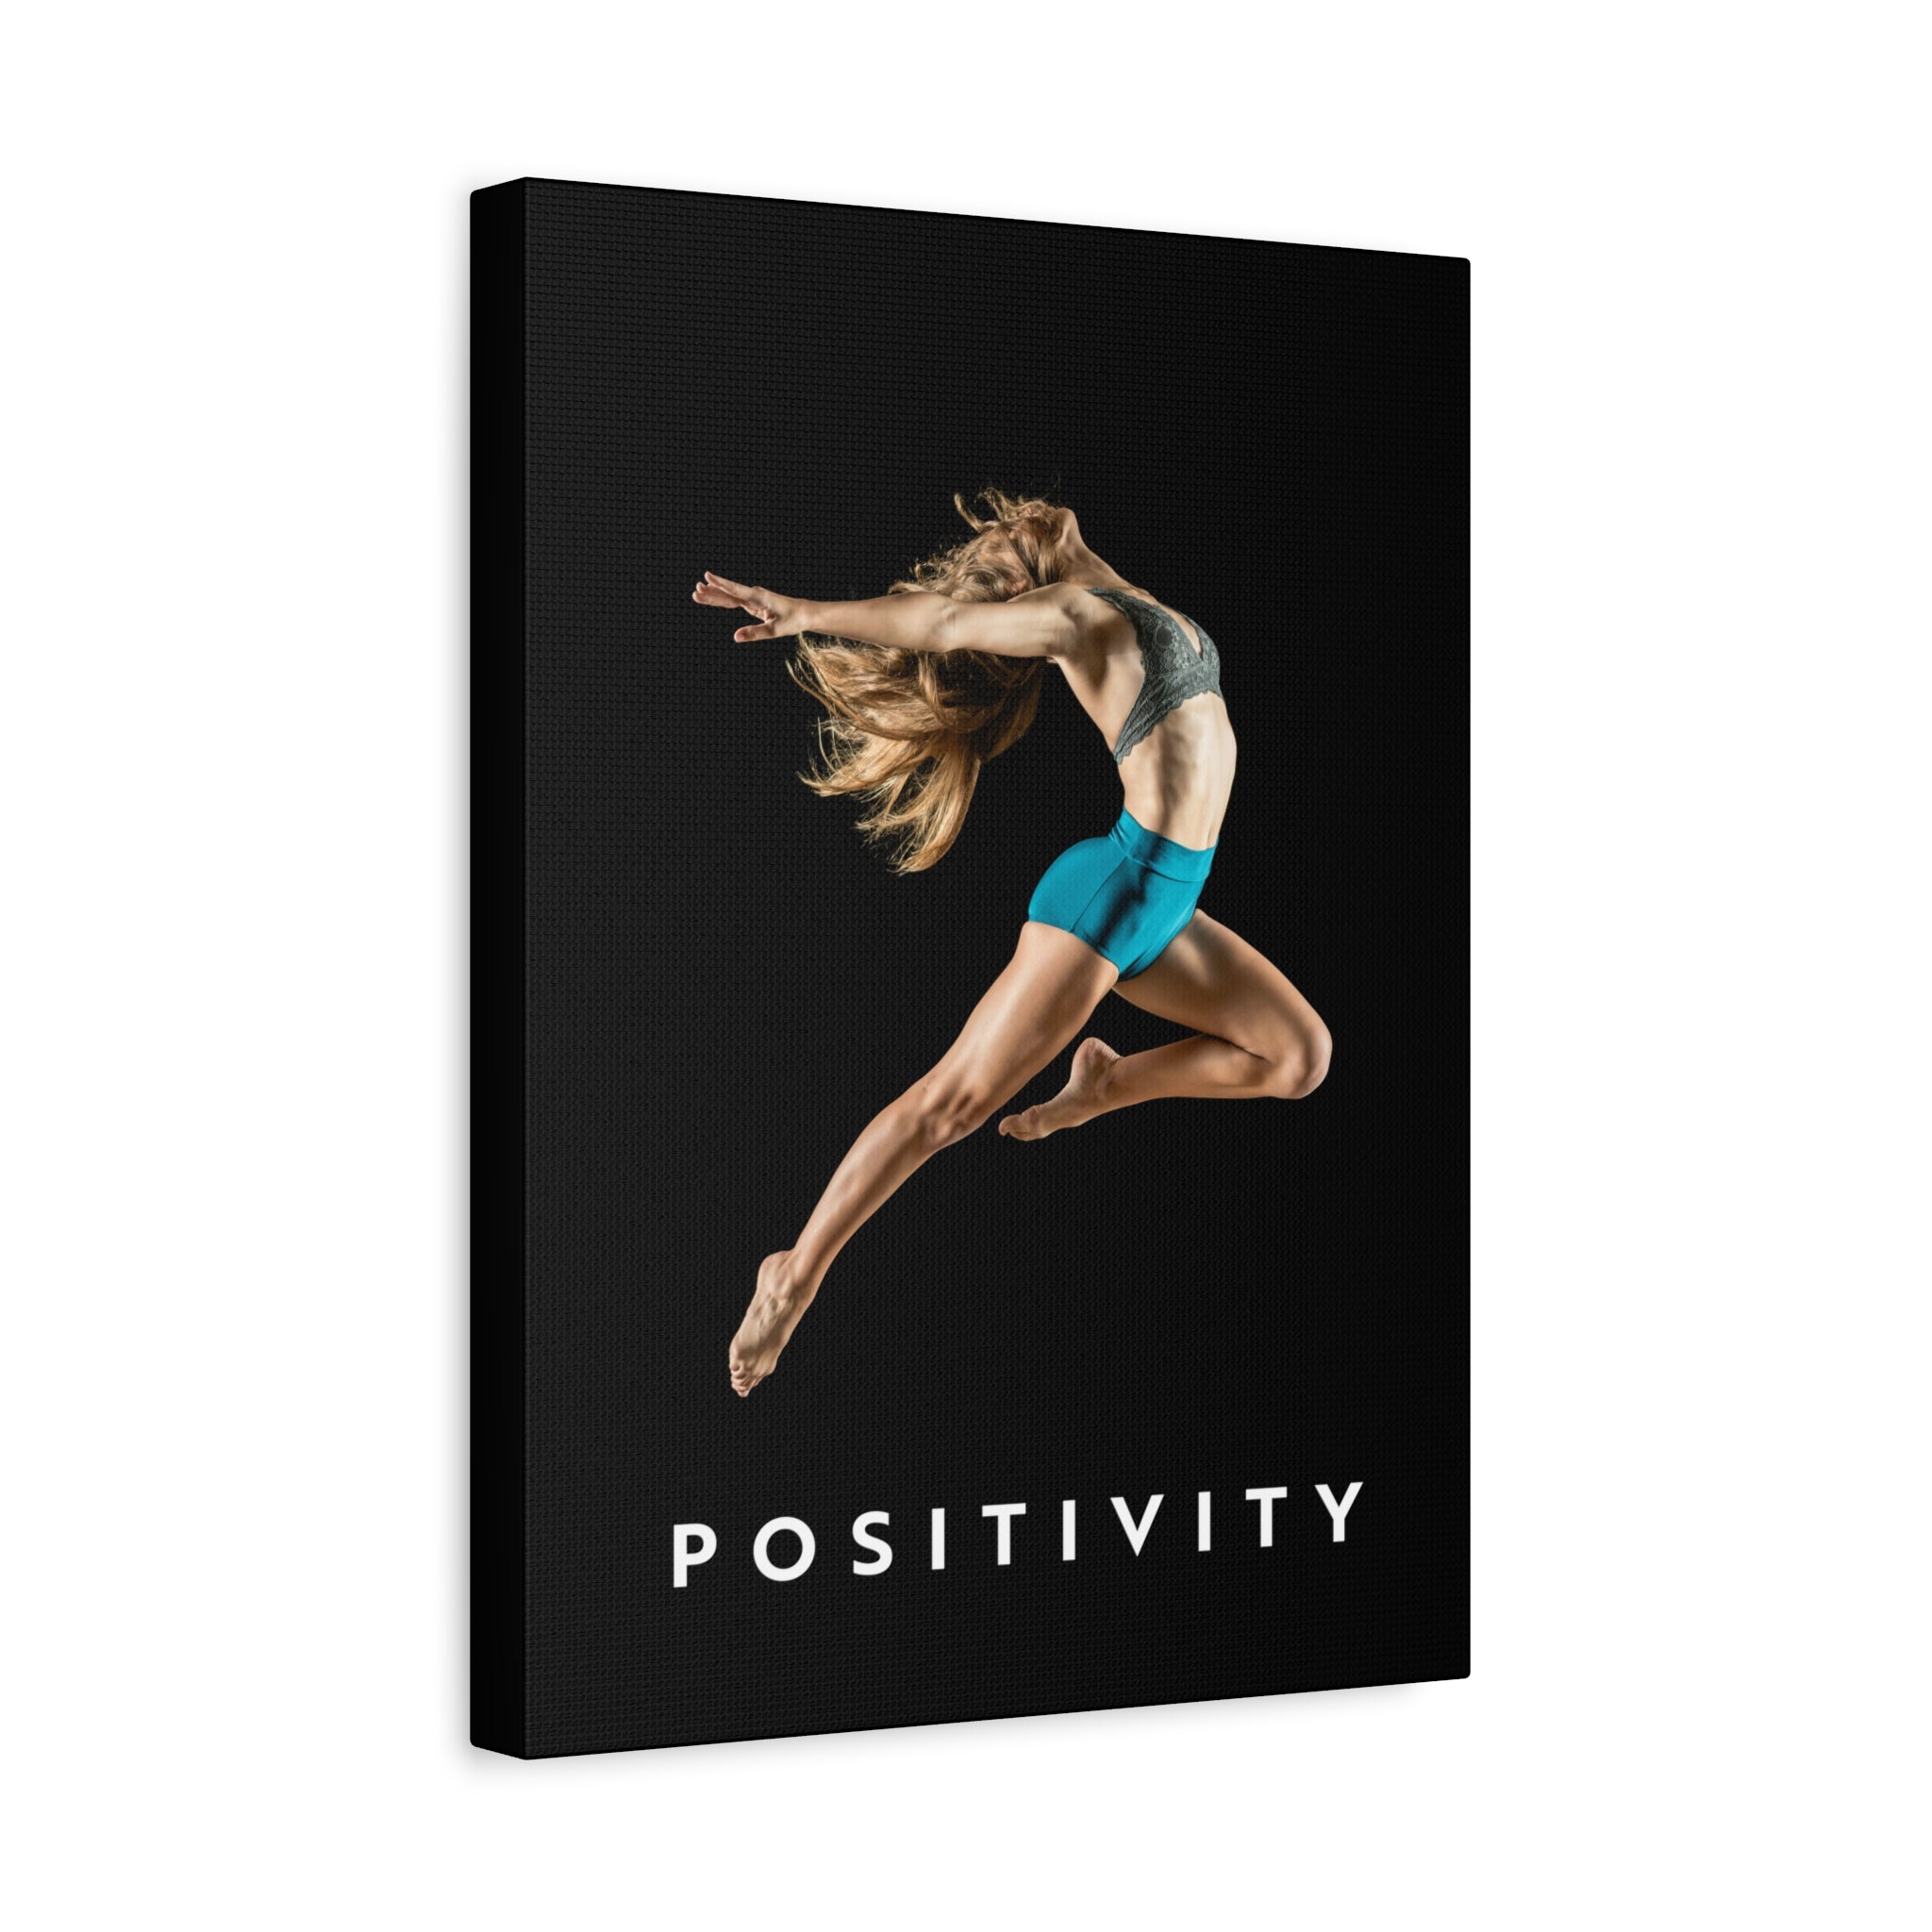 Positivity - Airborne - Wall Art additional image 1